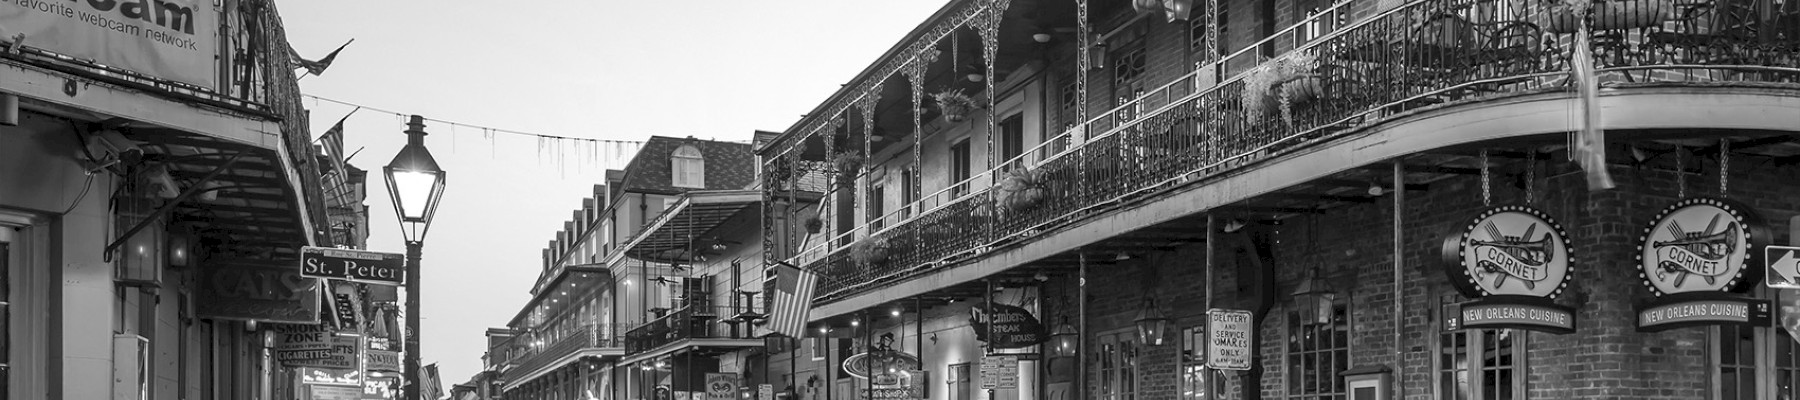 A black and white photo of a quiet street in a historic district with brick buildings and ornate iron balconies, likely early morning or evening.